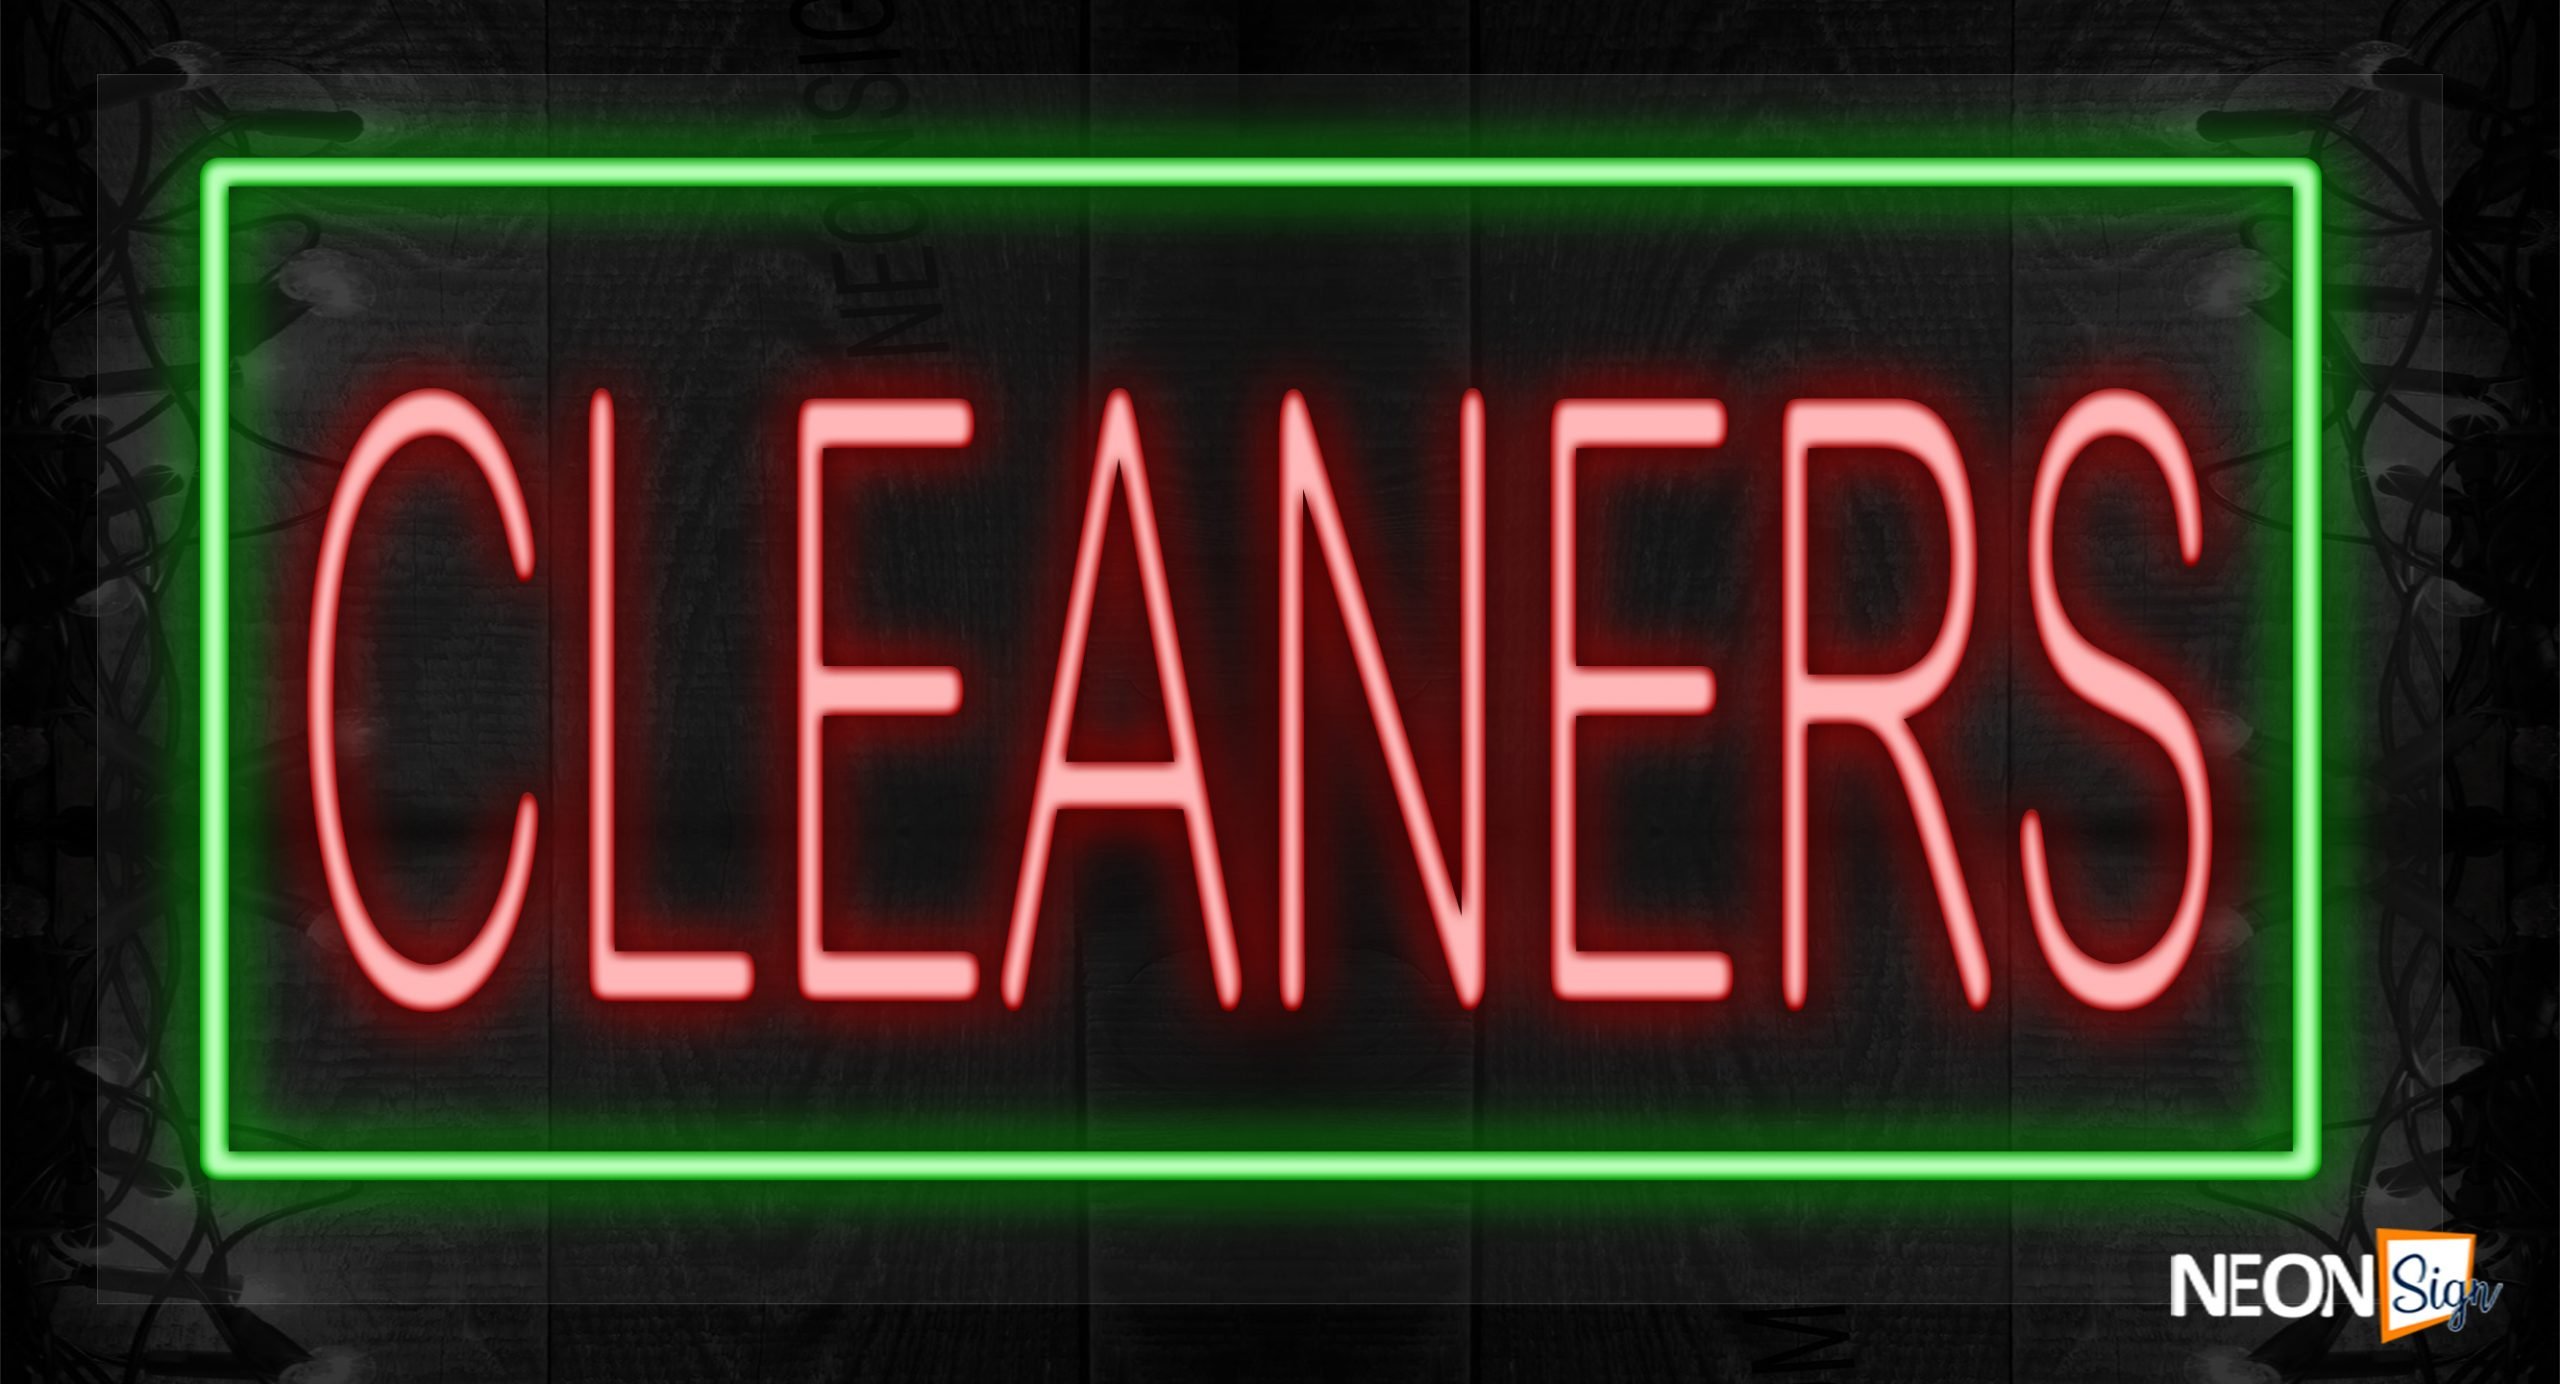 Image of Cleaners with green border LED Sign